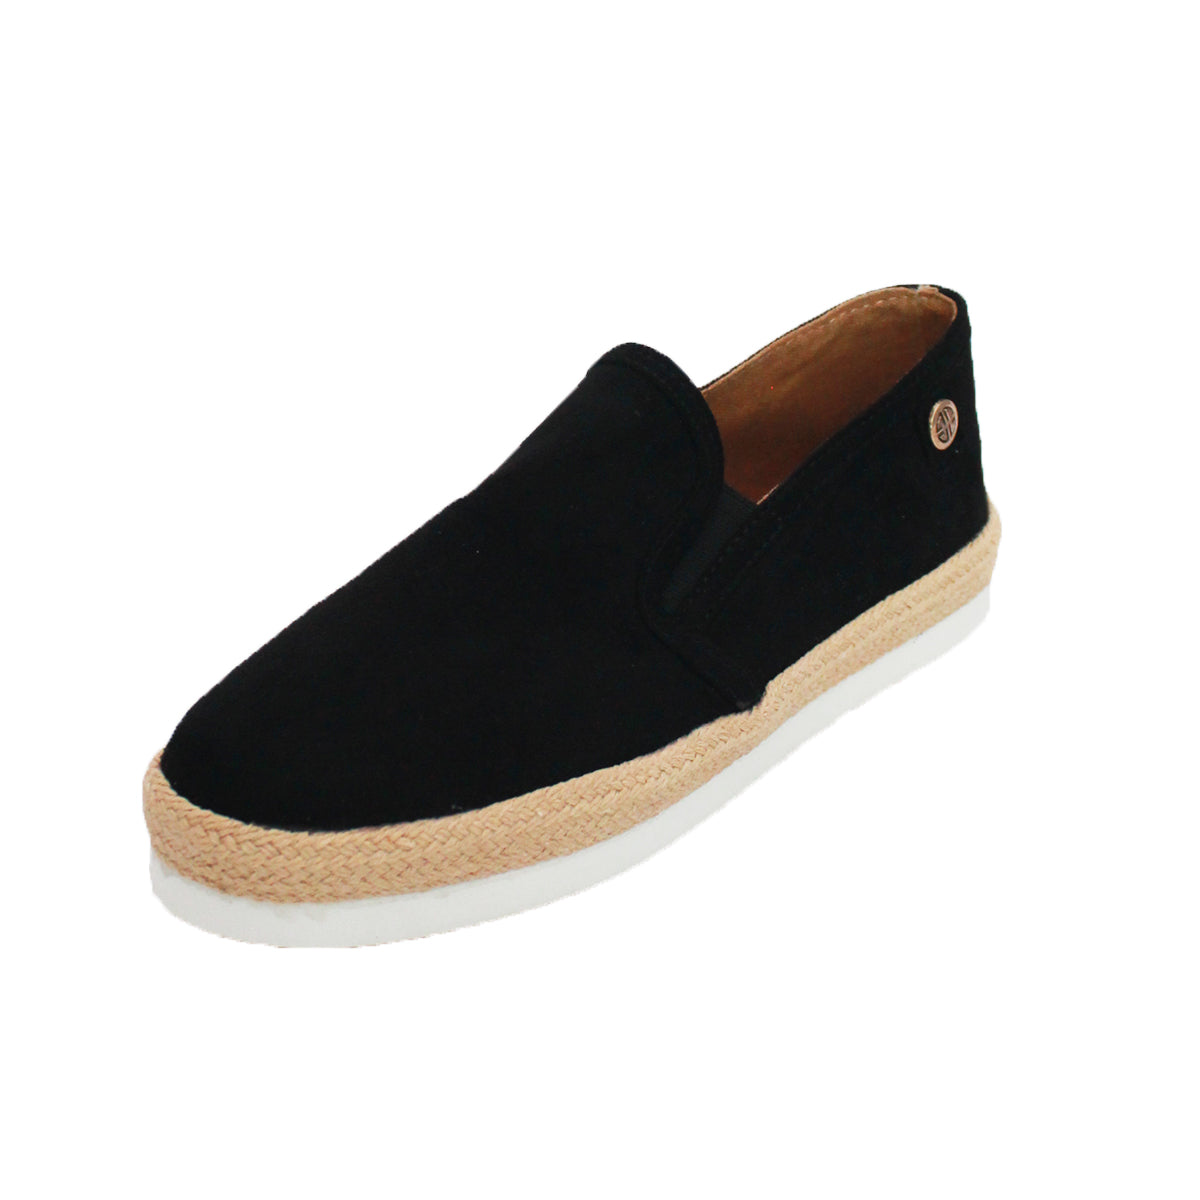 Black canvas flat pumps with rubber and hessian platform